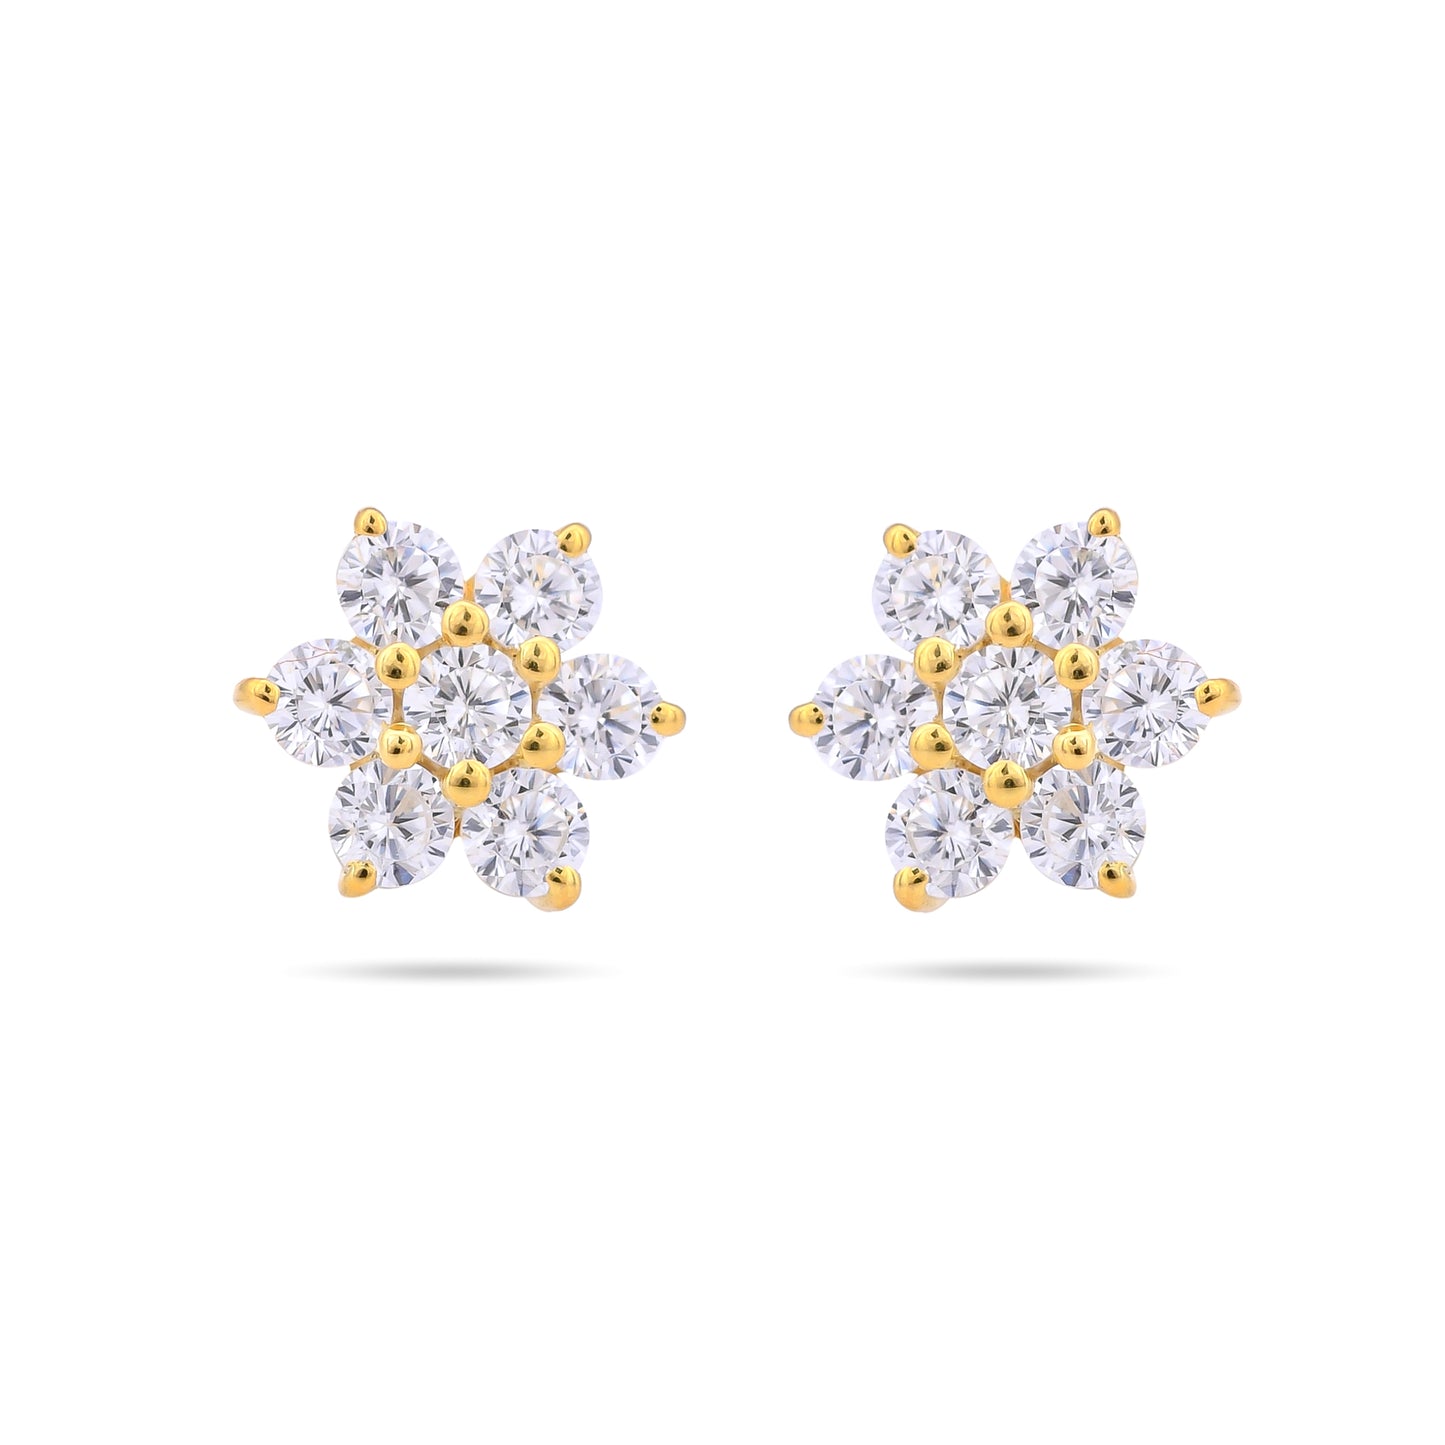 White Diamond Satnagi (Cluster) Studs Earrings 925 Silver| Gold Plated - From Purl Purl